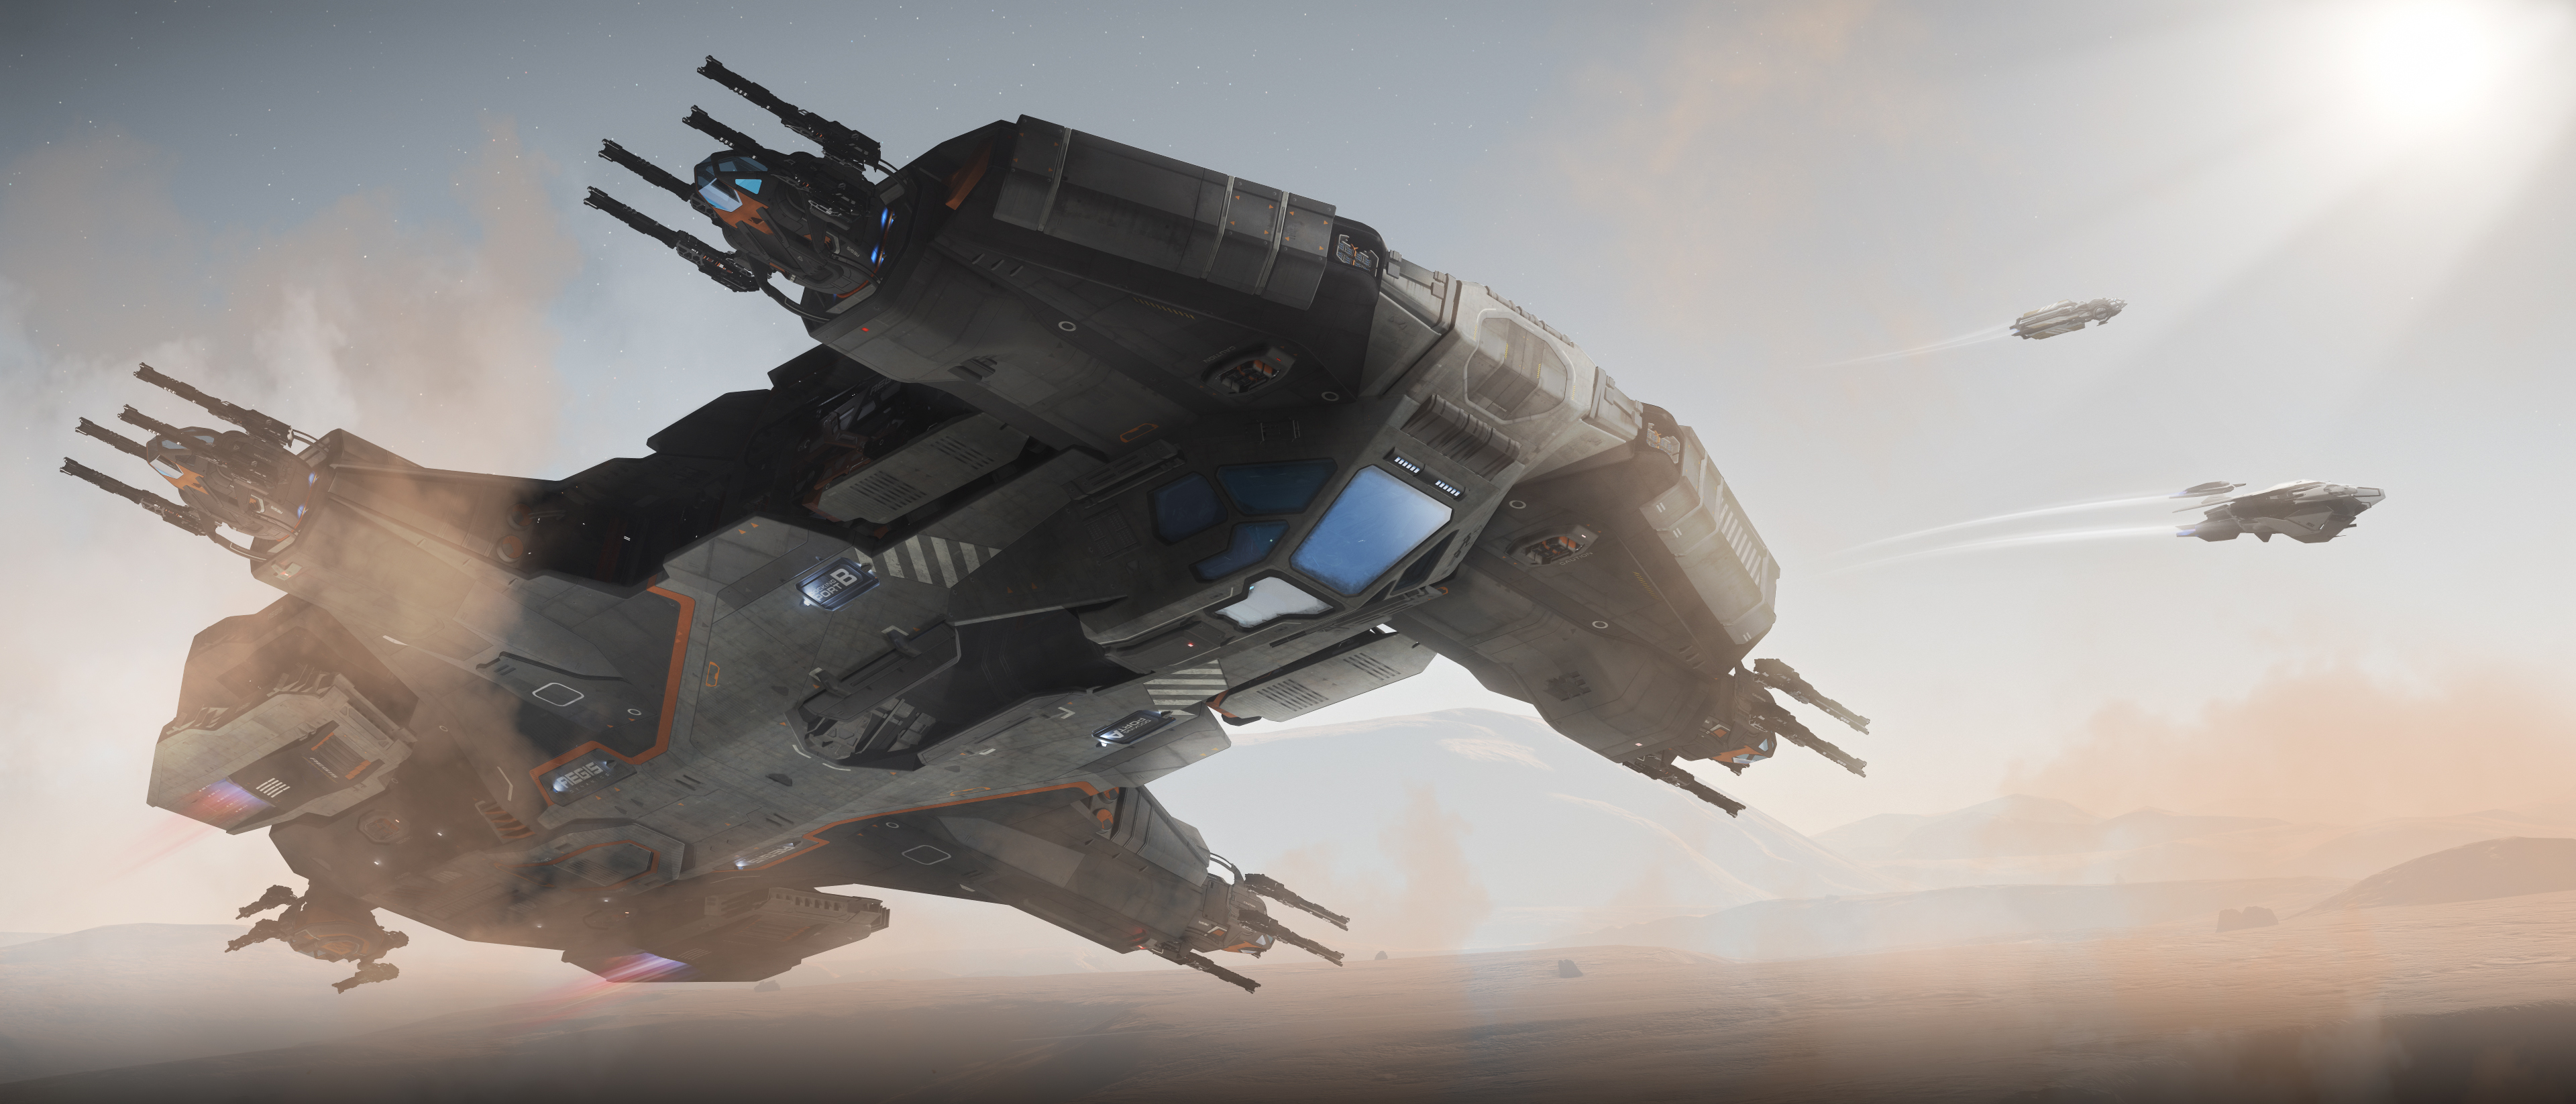 An image of a Hammerhead space ship from the game star citizen.